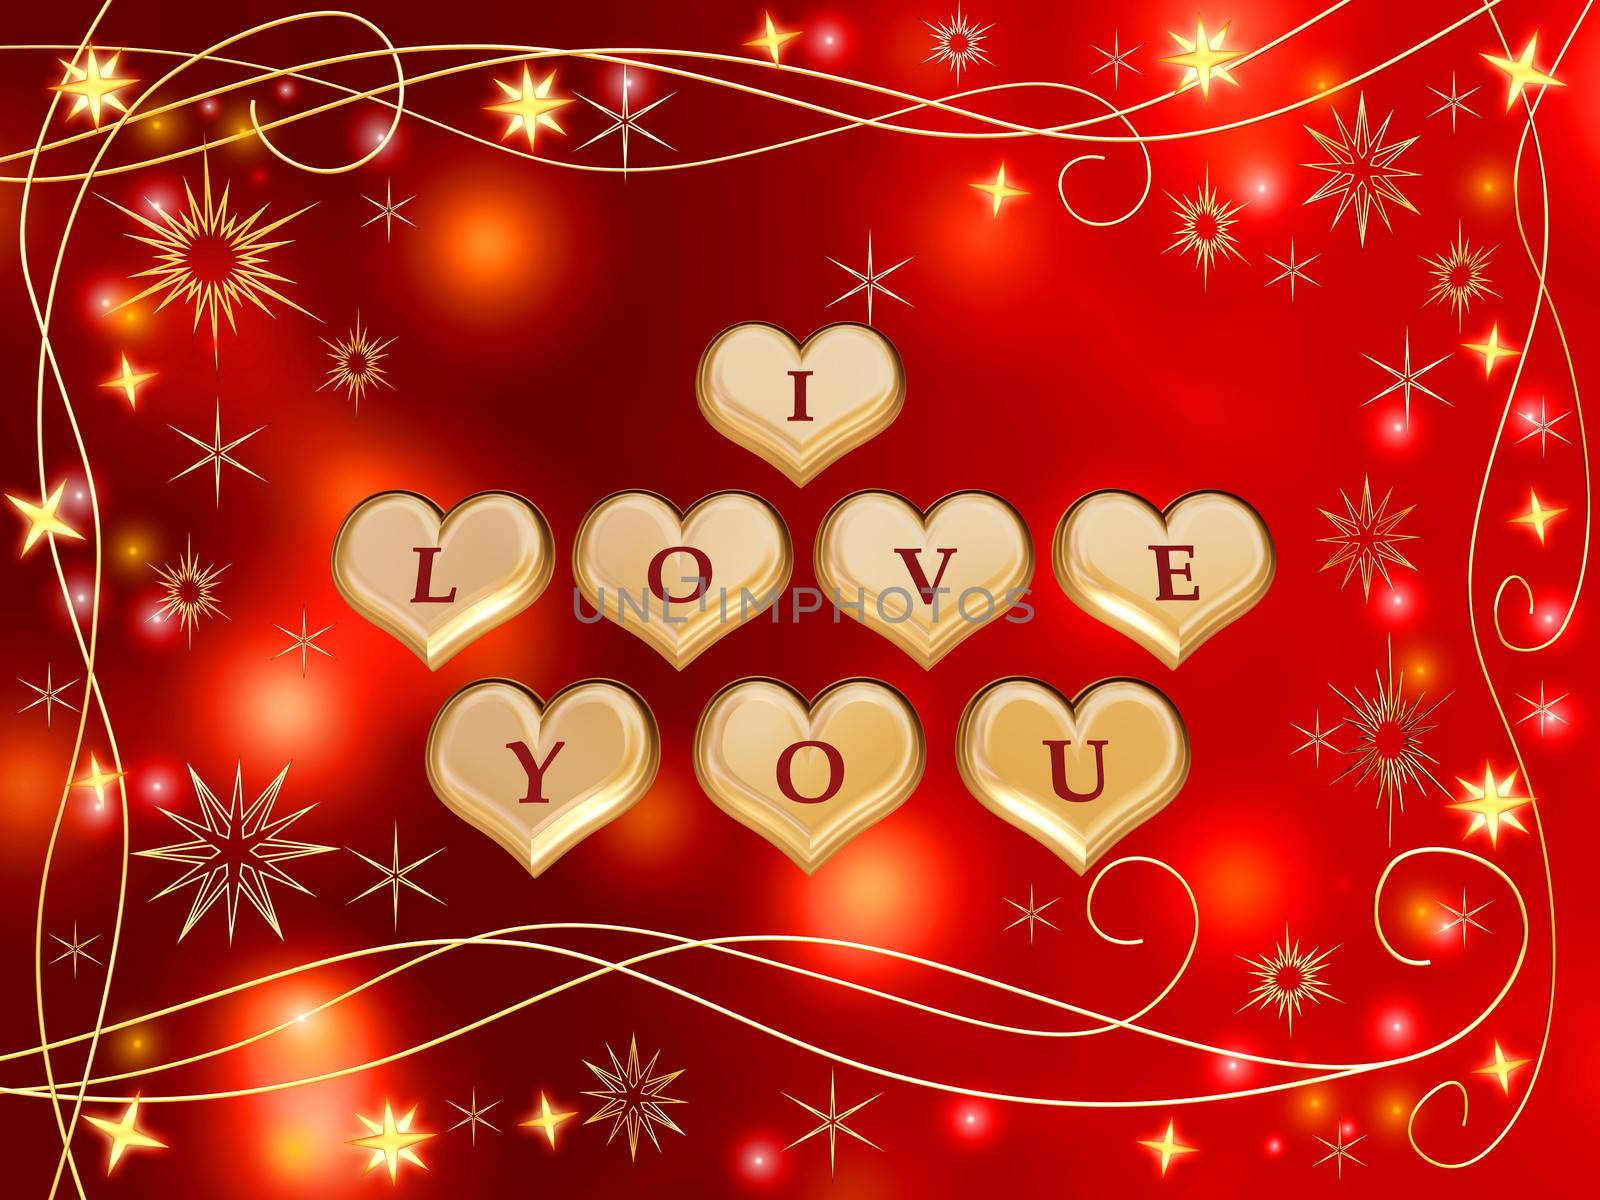 3d golden hearts, red letters, text - I love you, stars, lights, gleams
